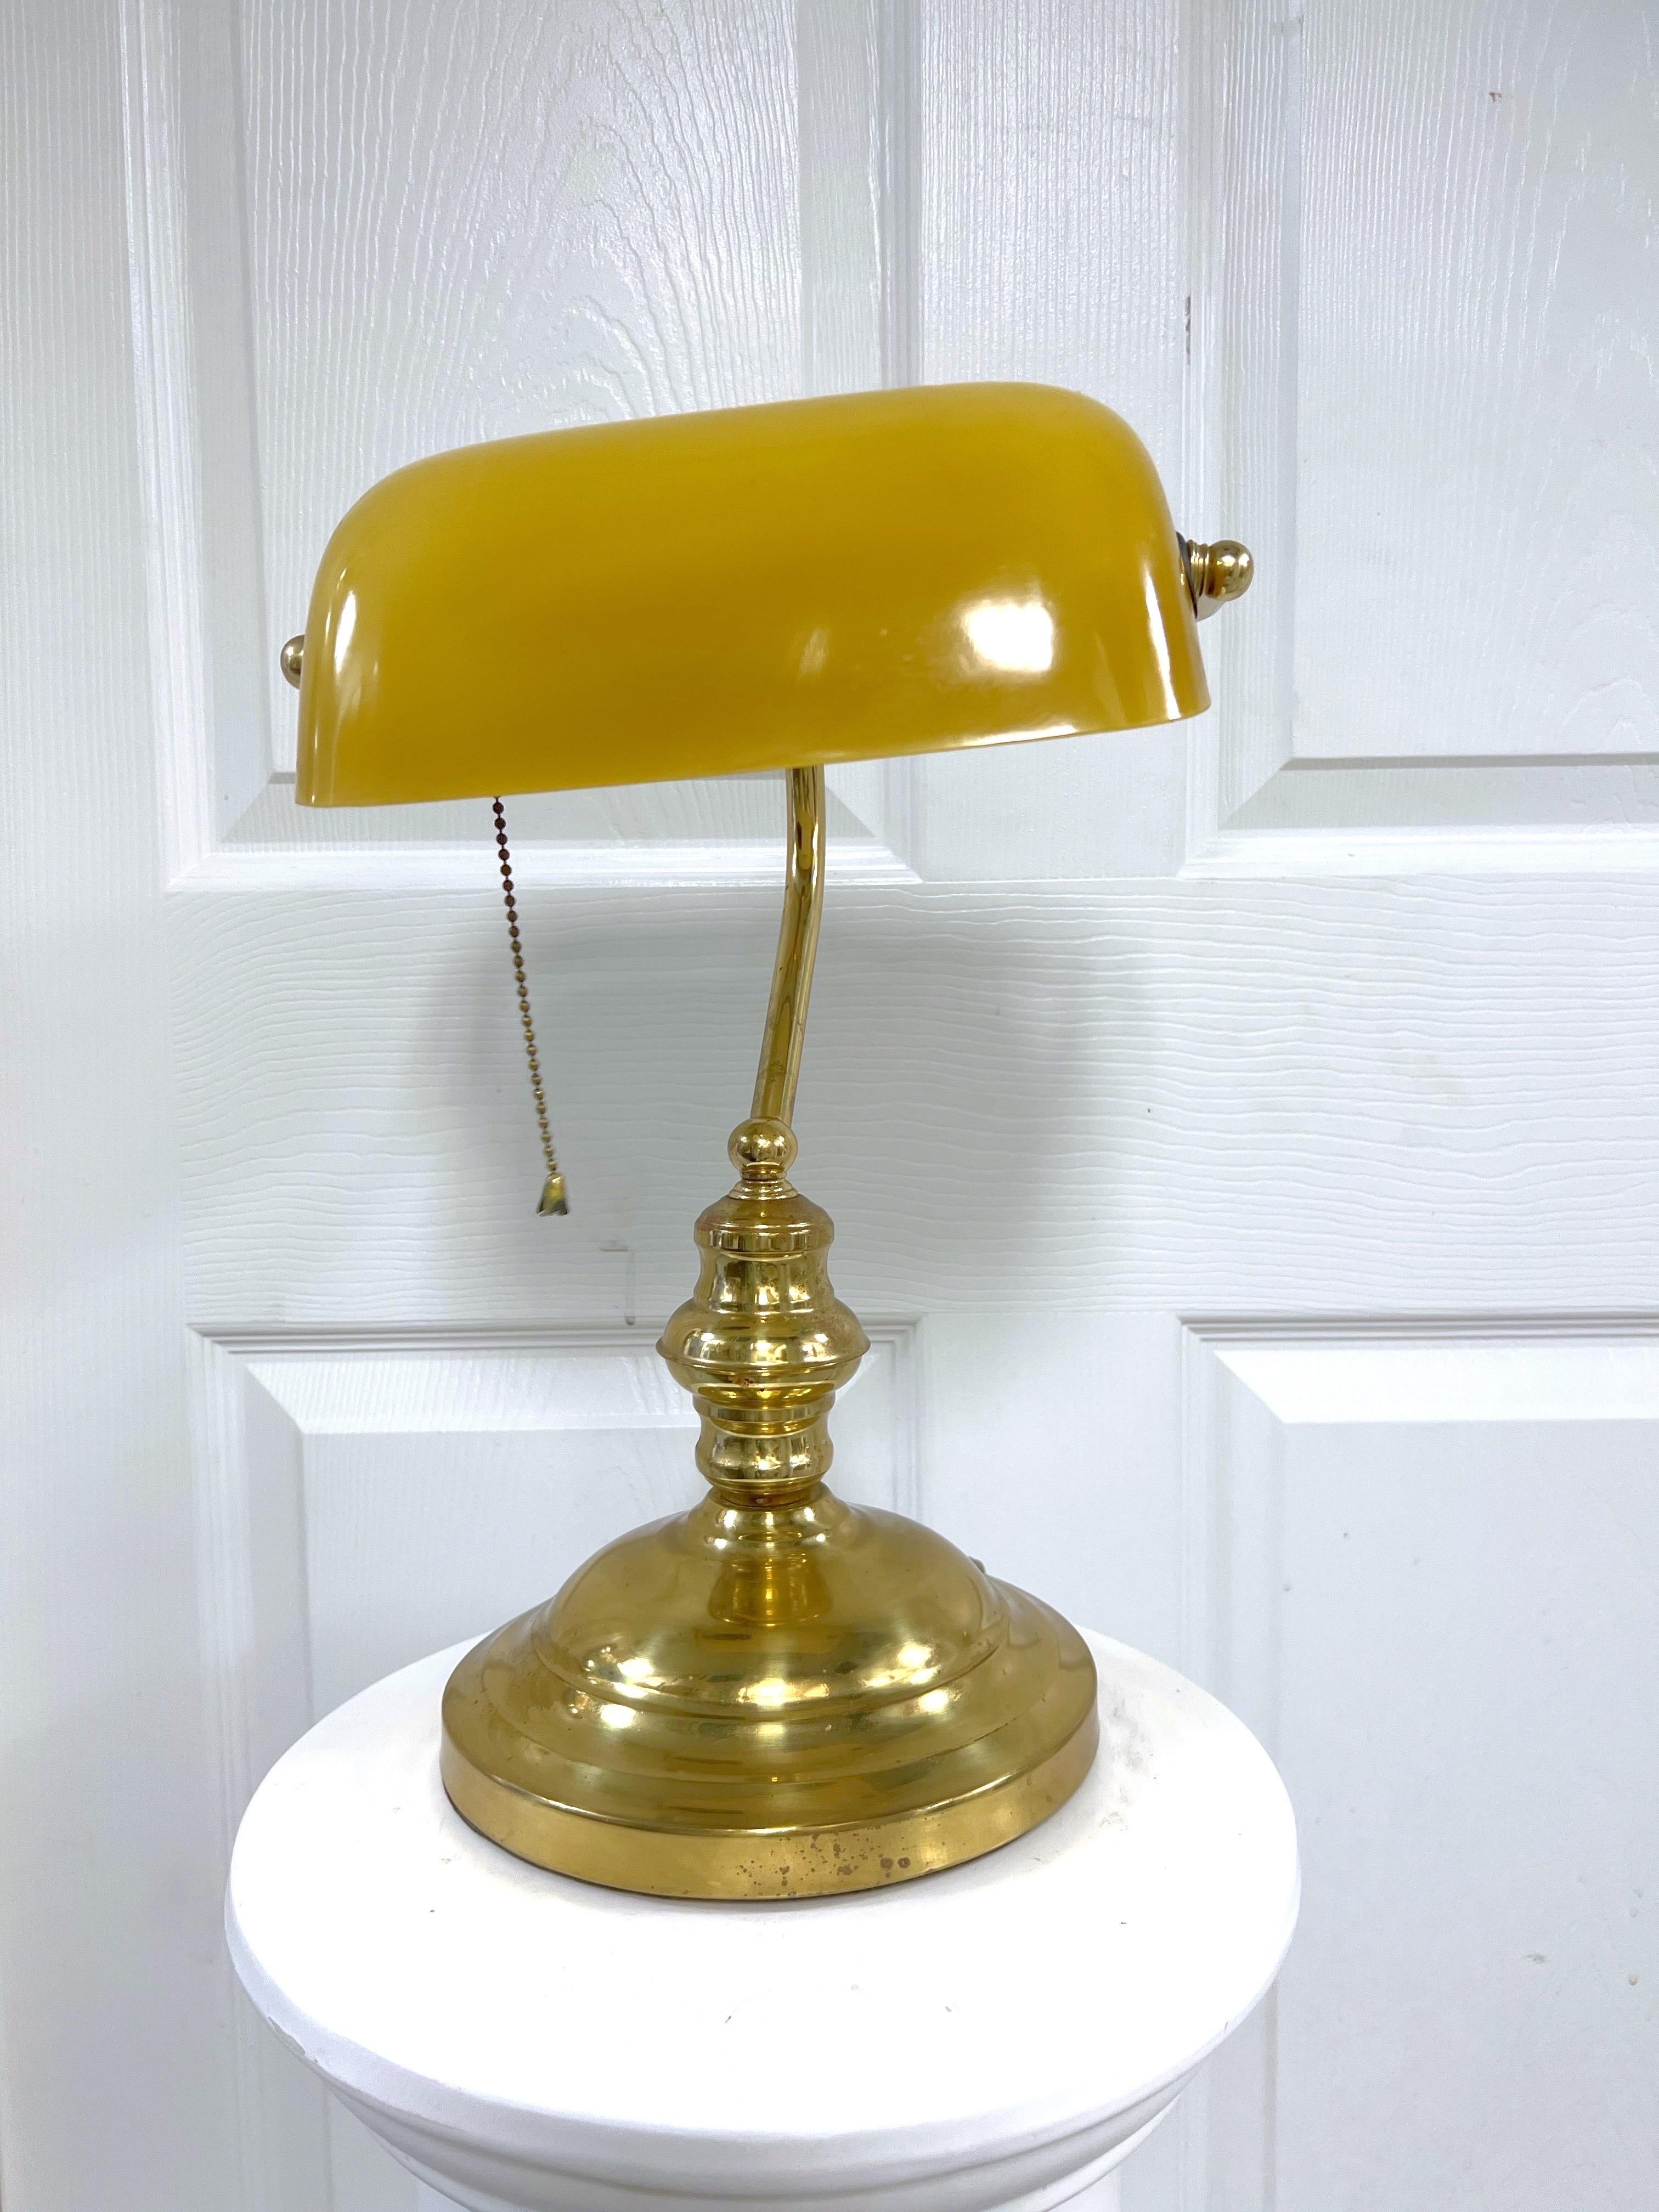 The Banker Lamp is a timeless classic of brass plating with a yellow opaline glass. An iconic design seen throughout the ages in movies, law offices, libraries and so on with a clean, modern twist.